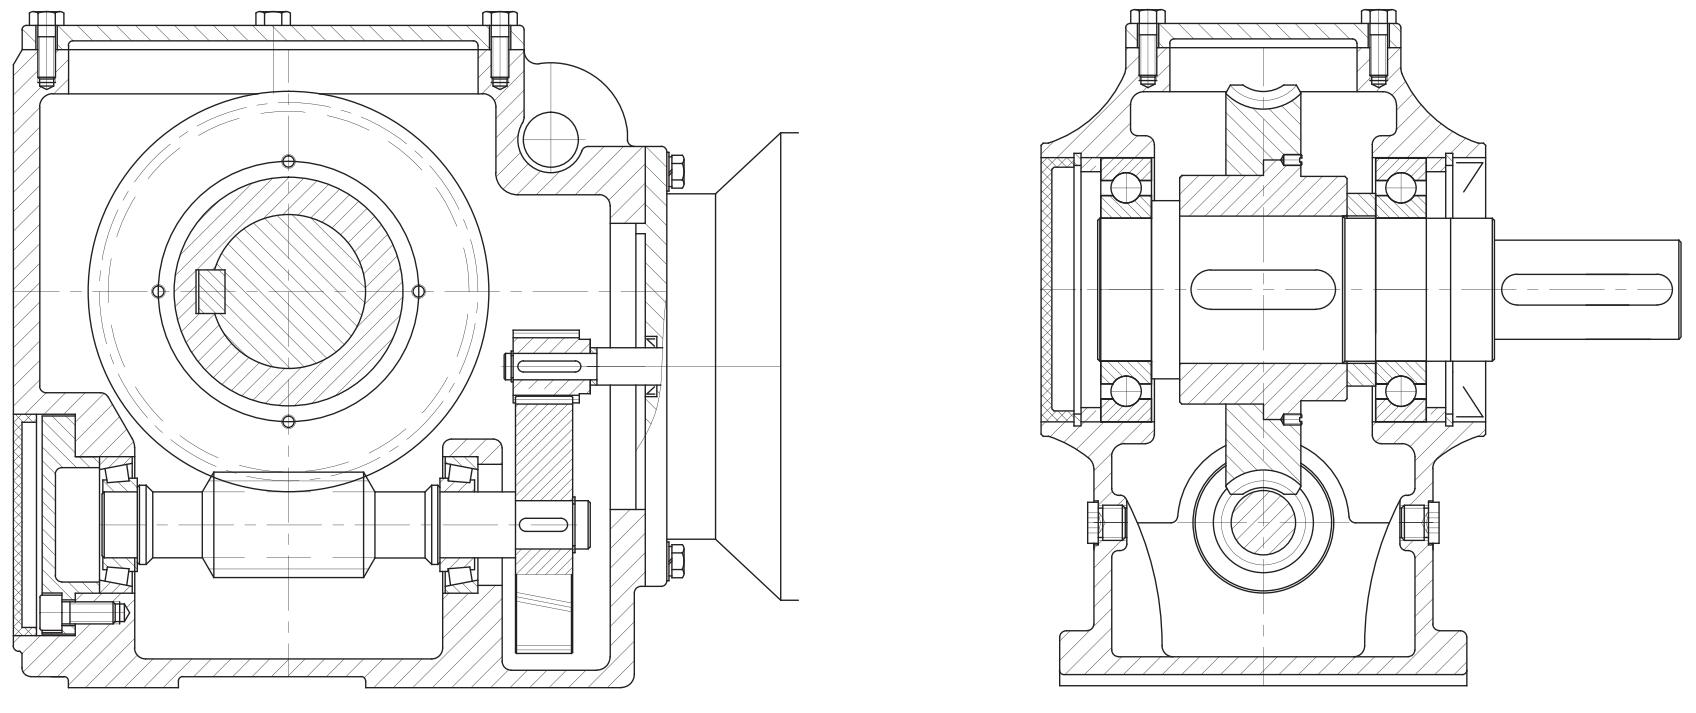 Worm helical gearbox structure drawing